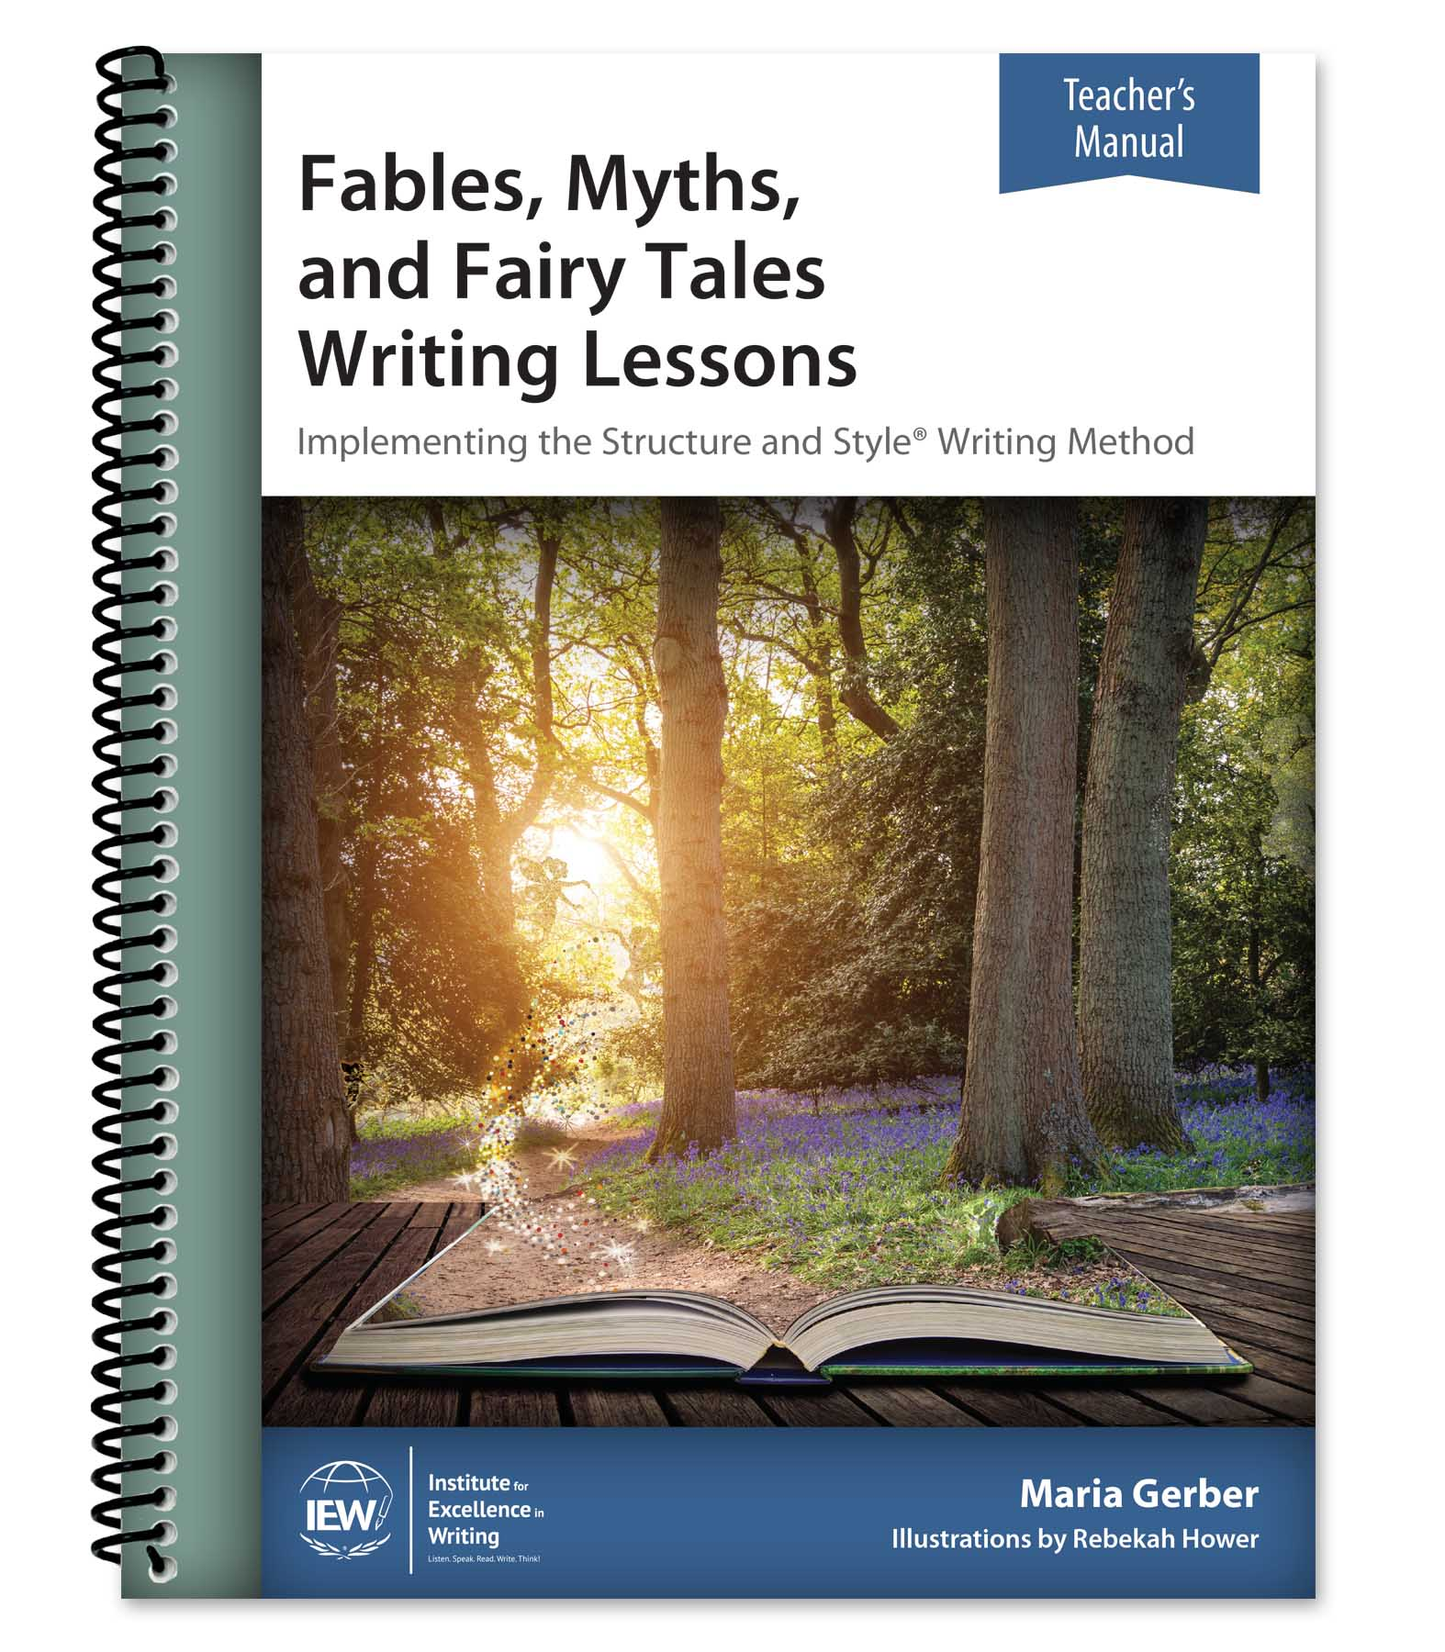 Fables, Myths and Fairy Tales. Themed Based Writing Lessons